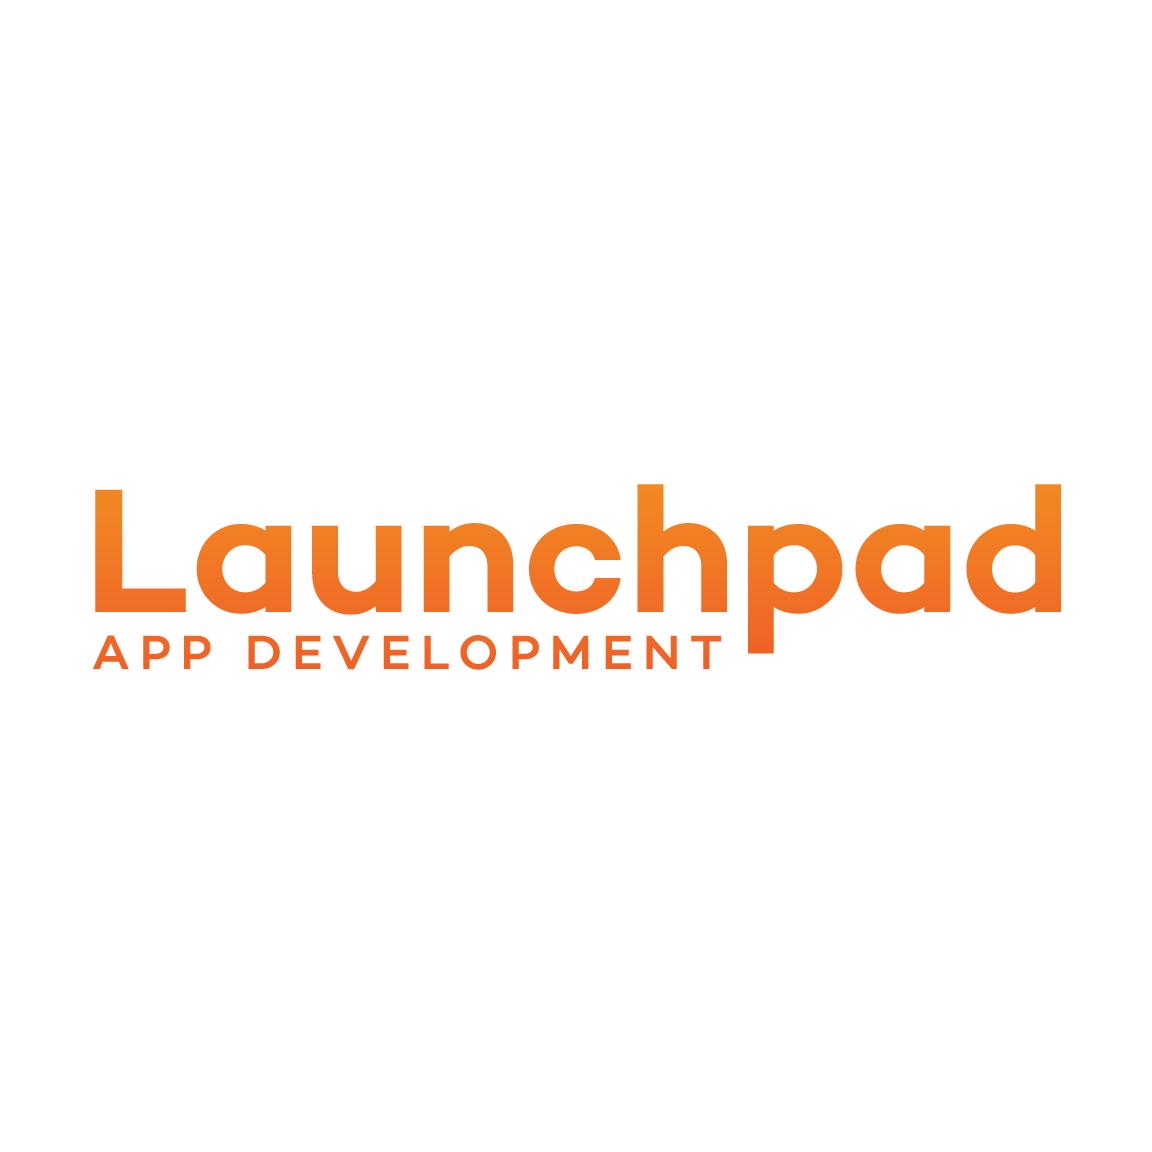 Launchpad App Development profile on Qualified.One